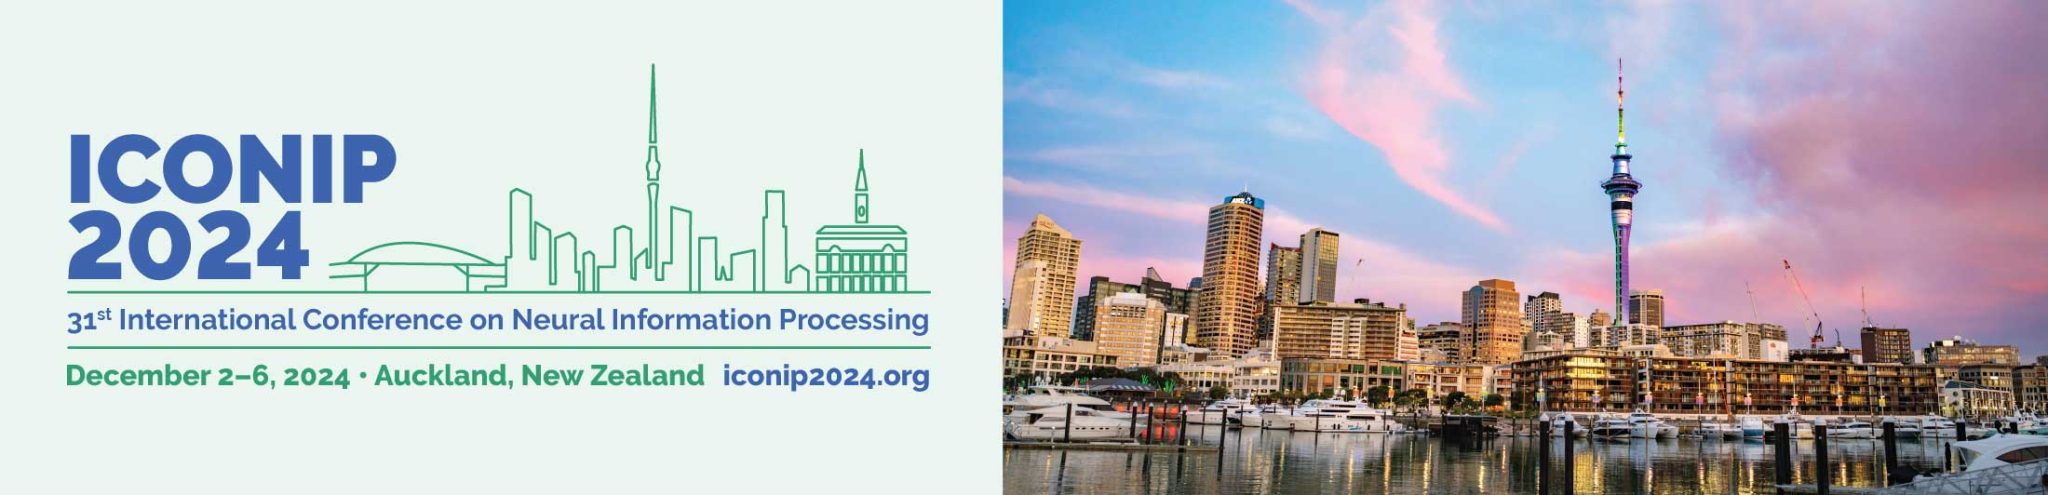 ICONIP 2024 (31st International Conference on Neural Information Processing of the Asia-Pacific Neural Network Society)